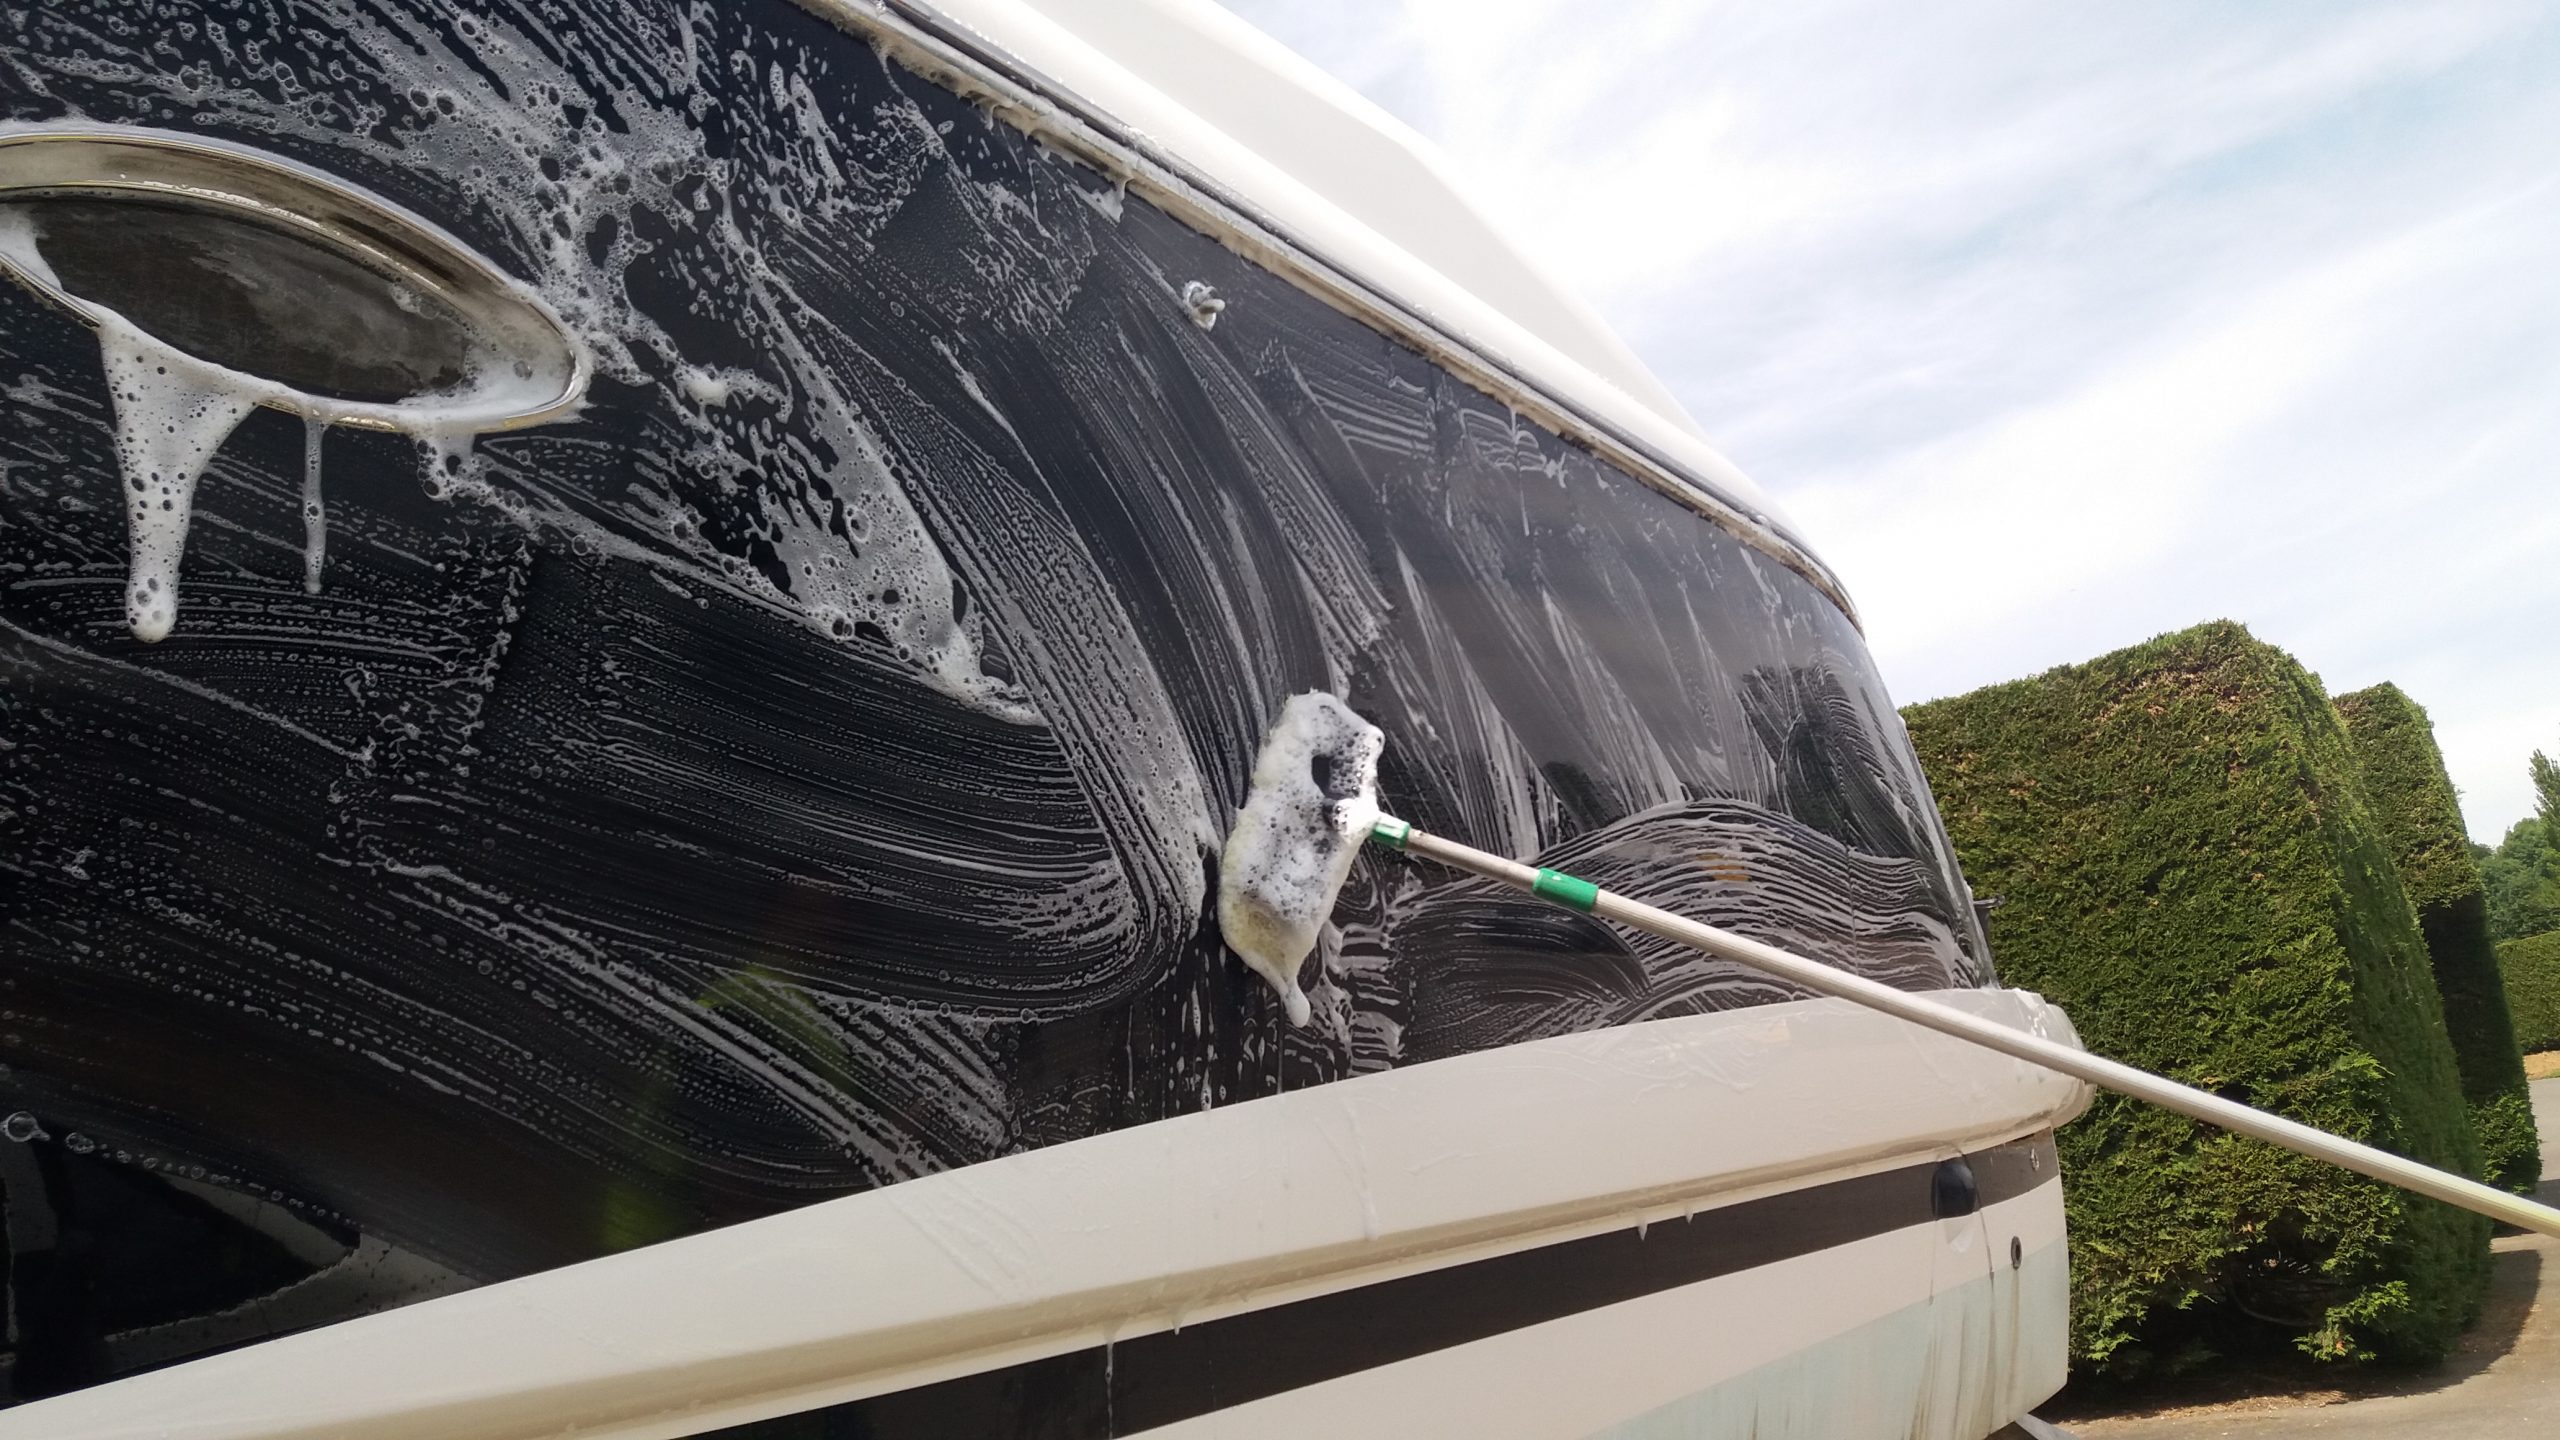 Boat Cleaning Service